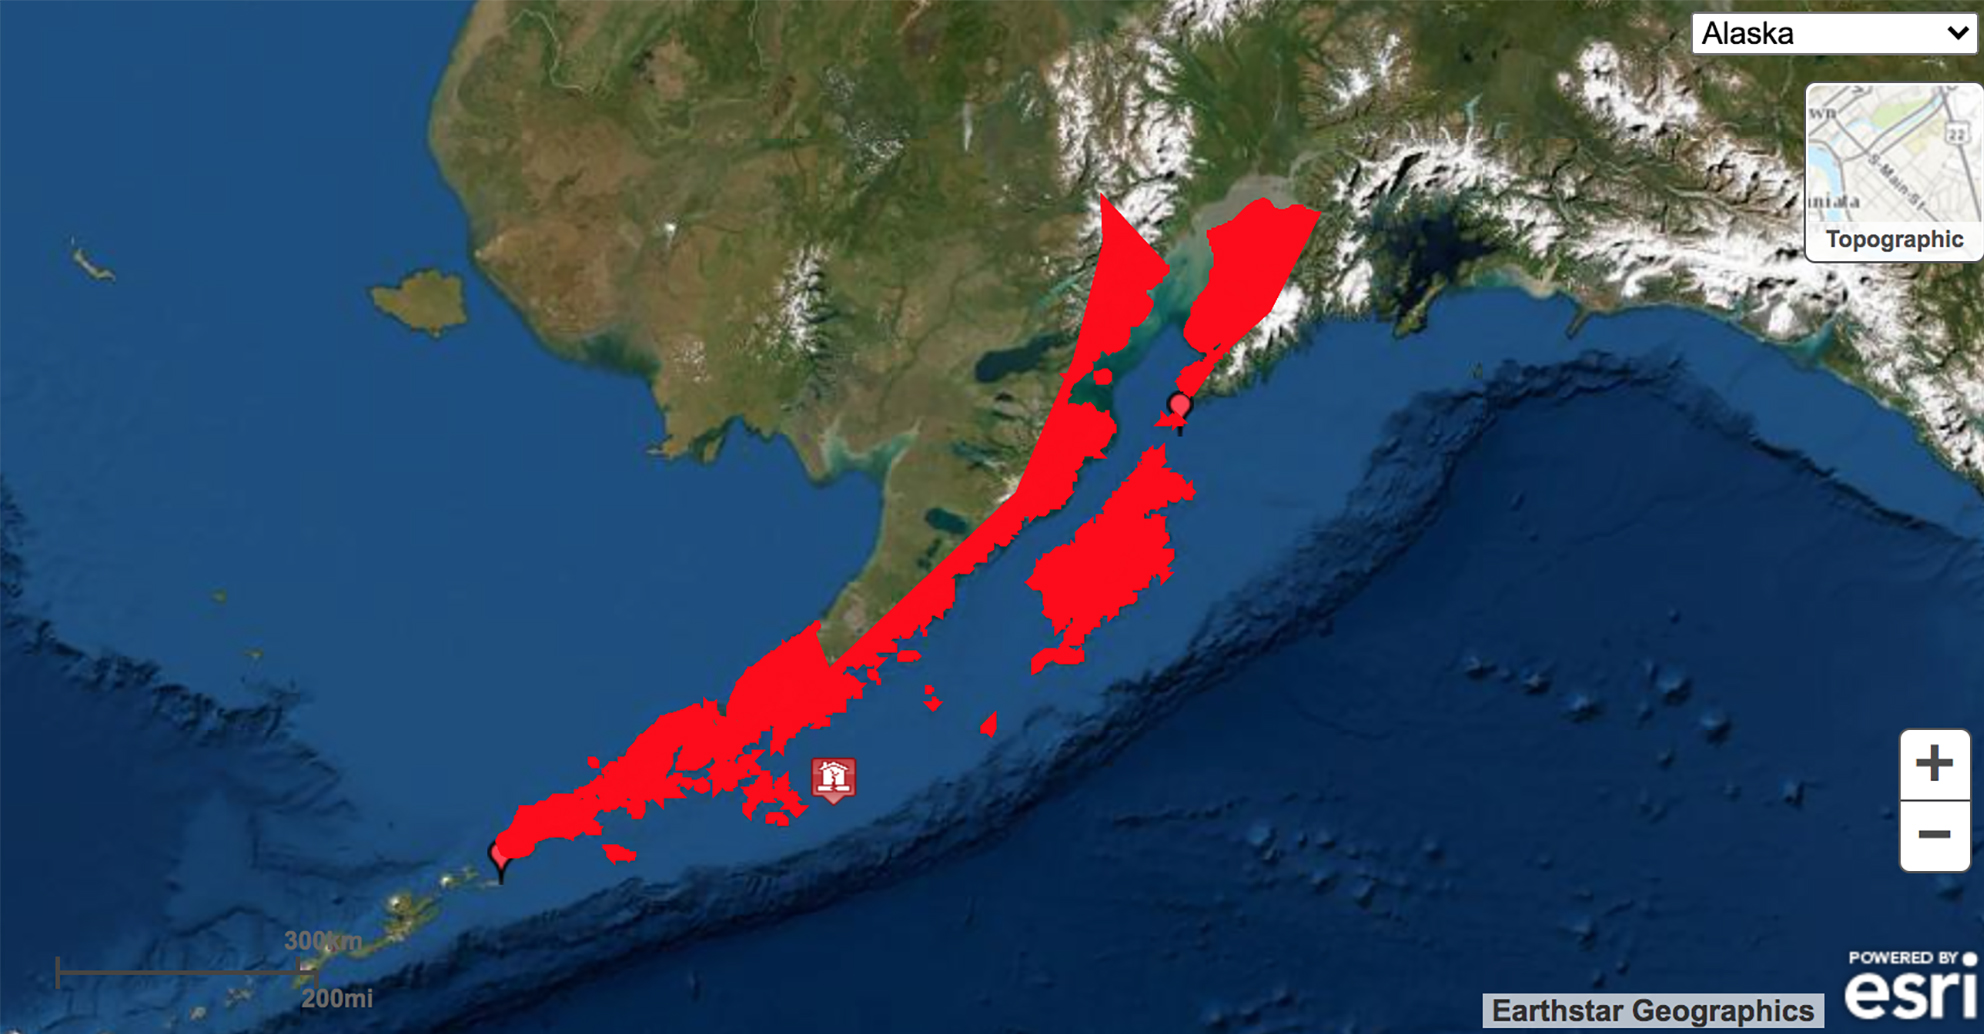 A Tsunami Warning That Sent Coastal Alaskans To Higher Ground Has Been Cancelled